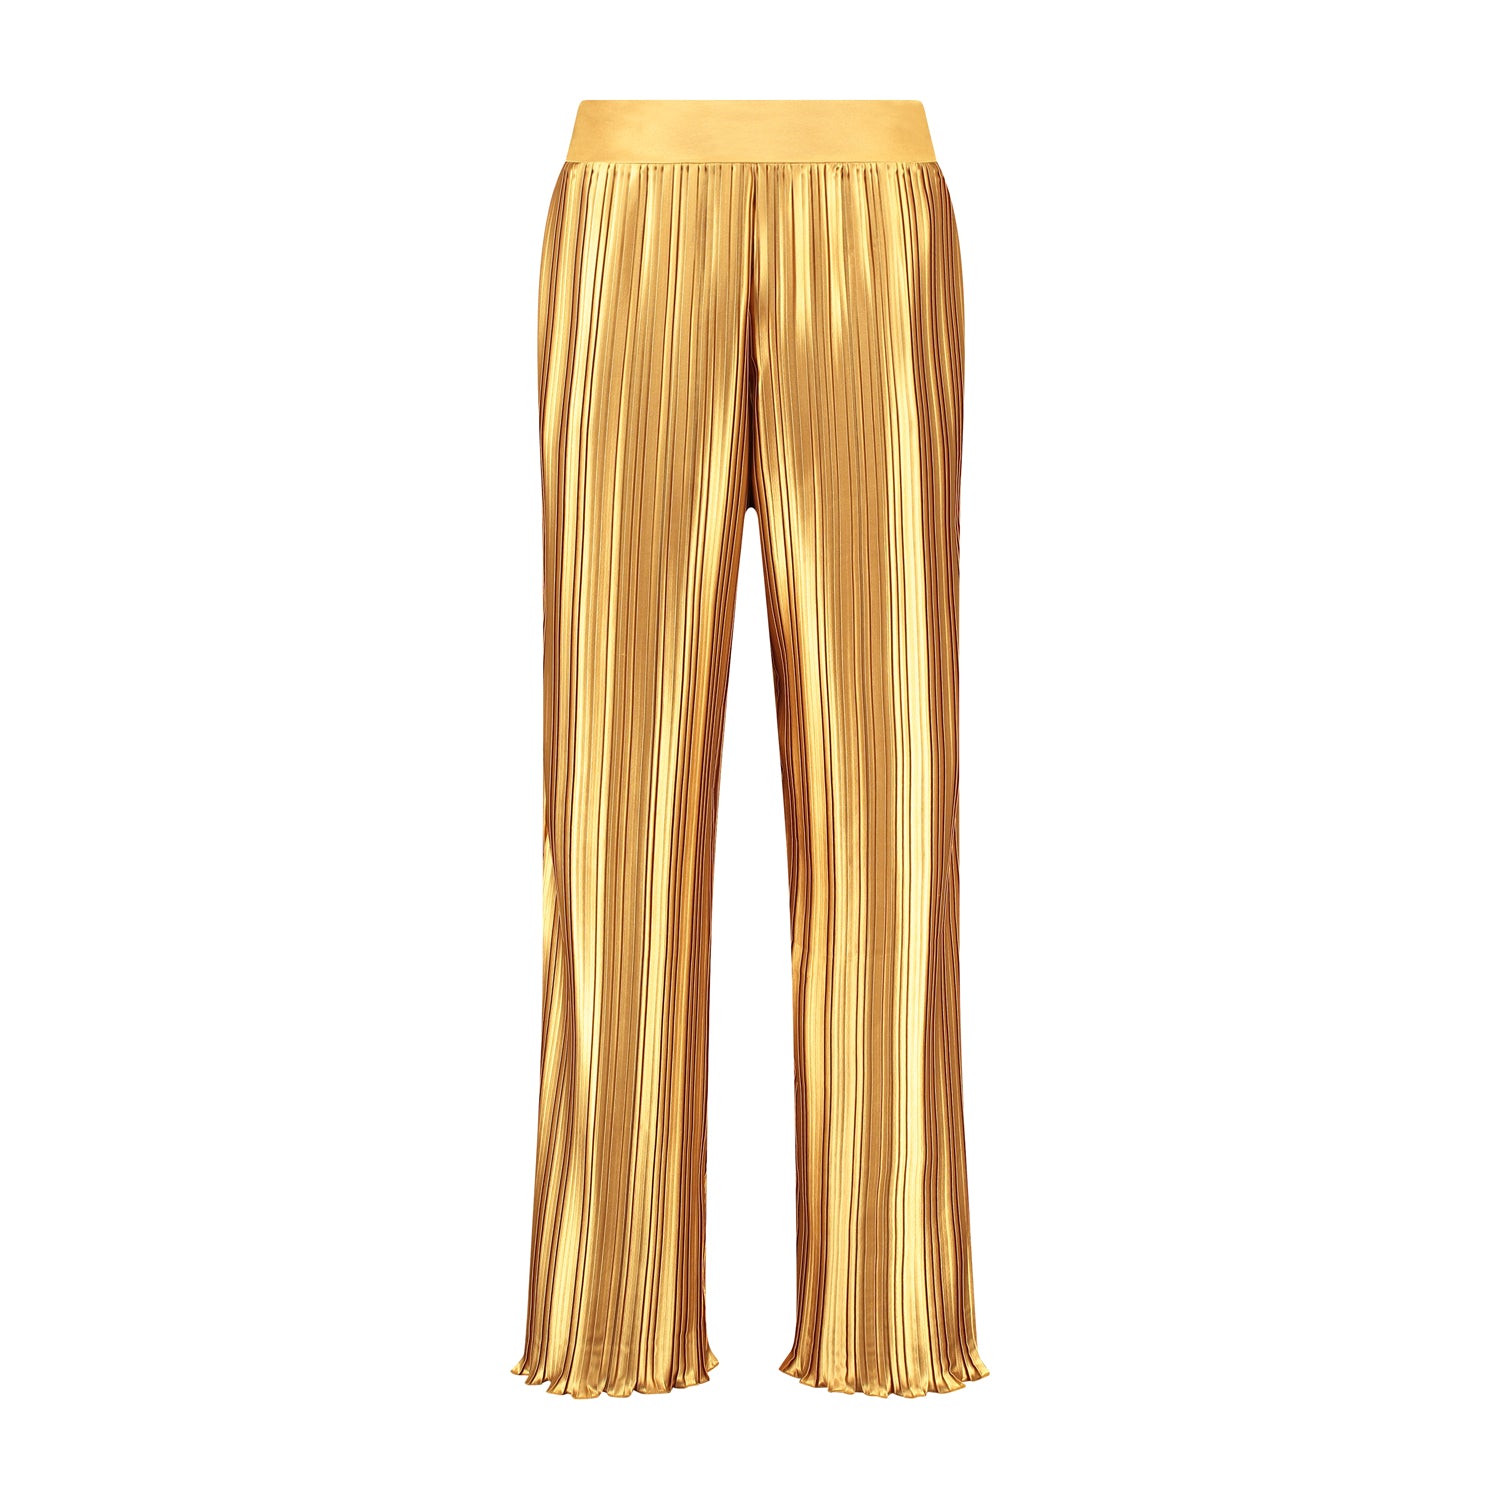 Abby pleated pants - gold